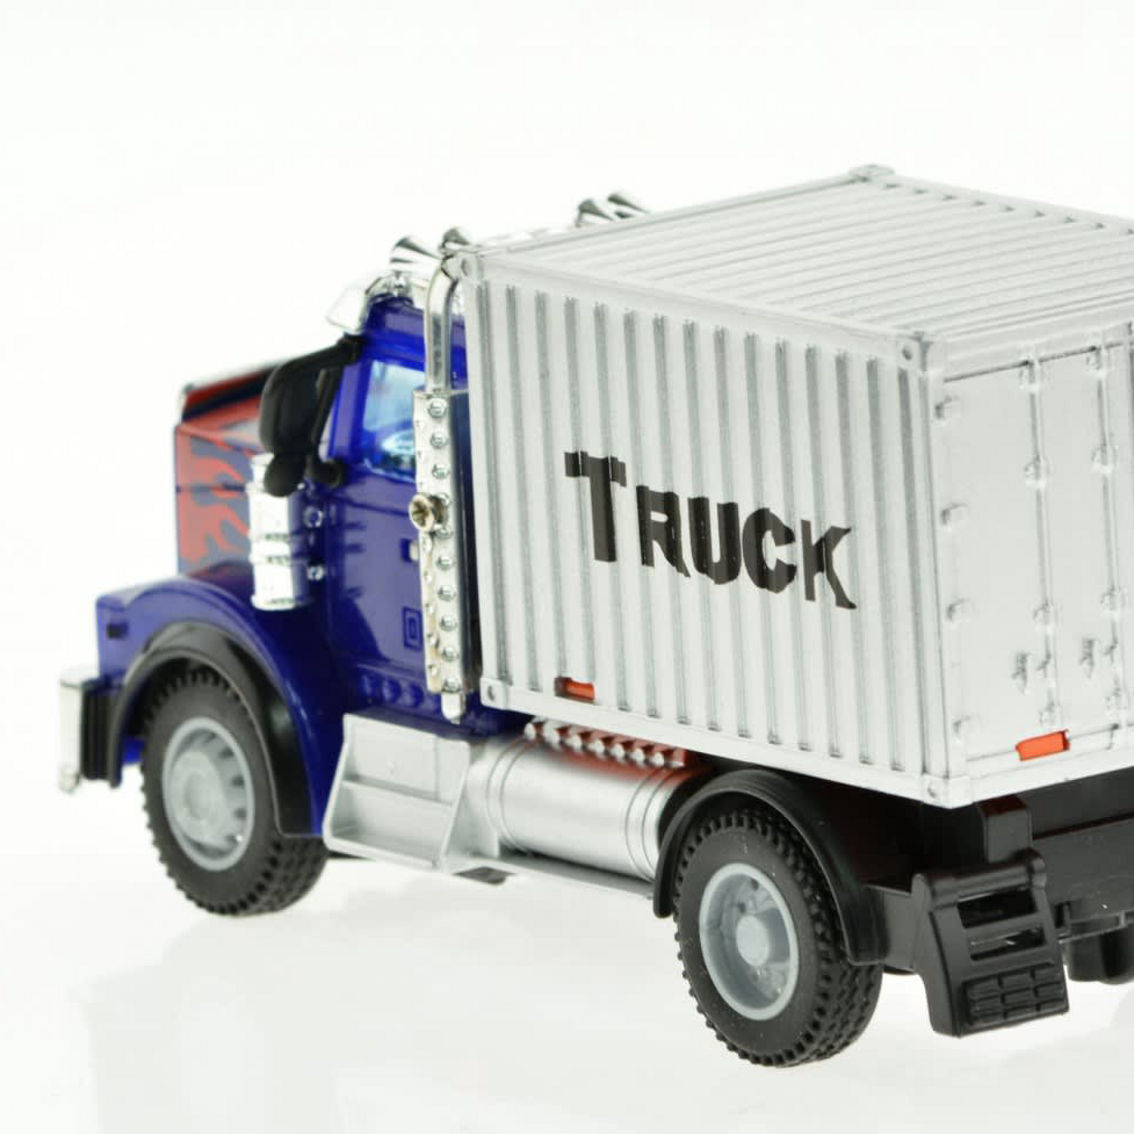 CIS-AG56162B2 2.4G 1:64 RC Transportation container Truck with lights and sound - Image 3 of 5